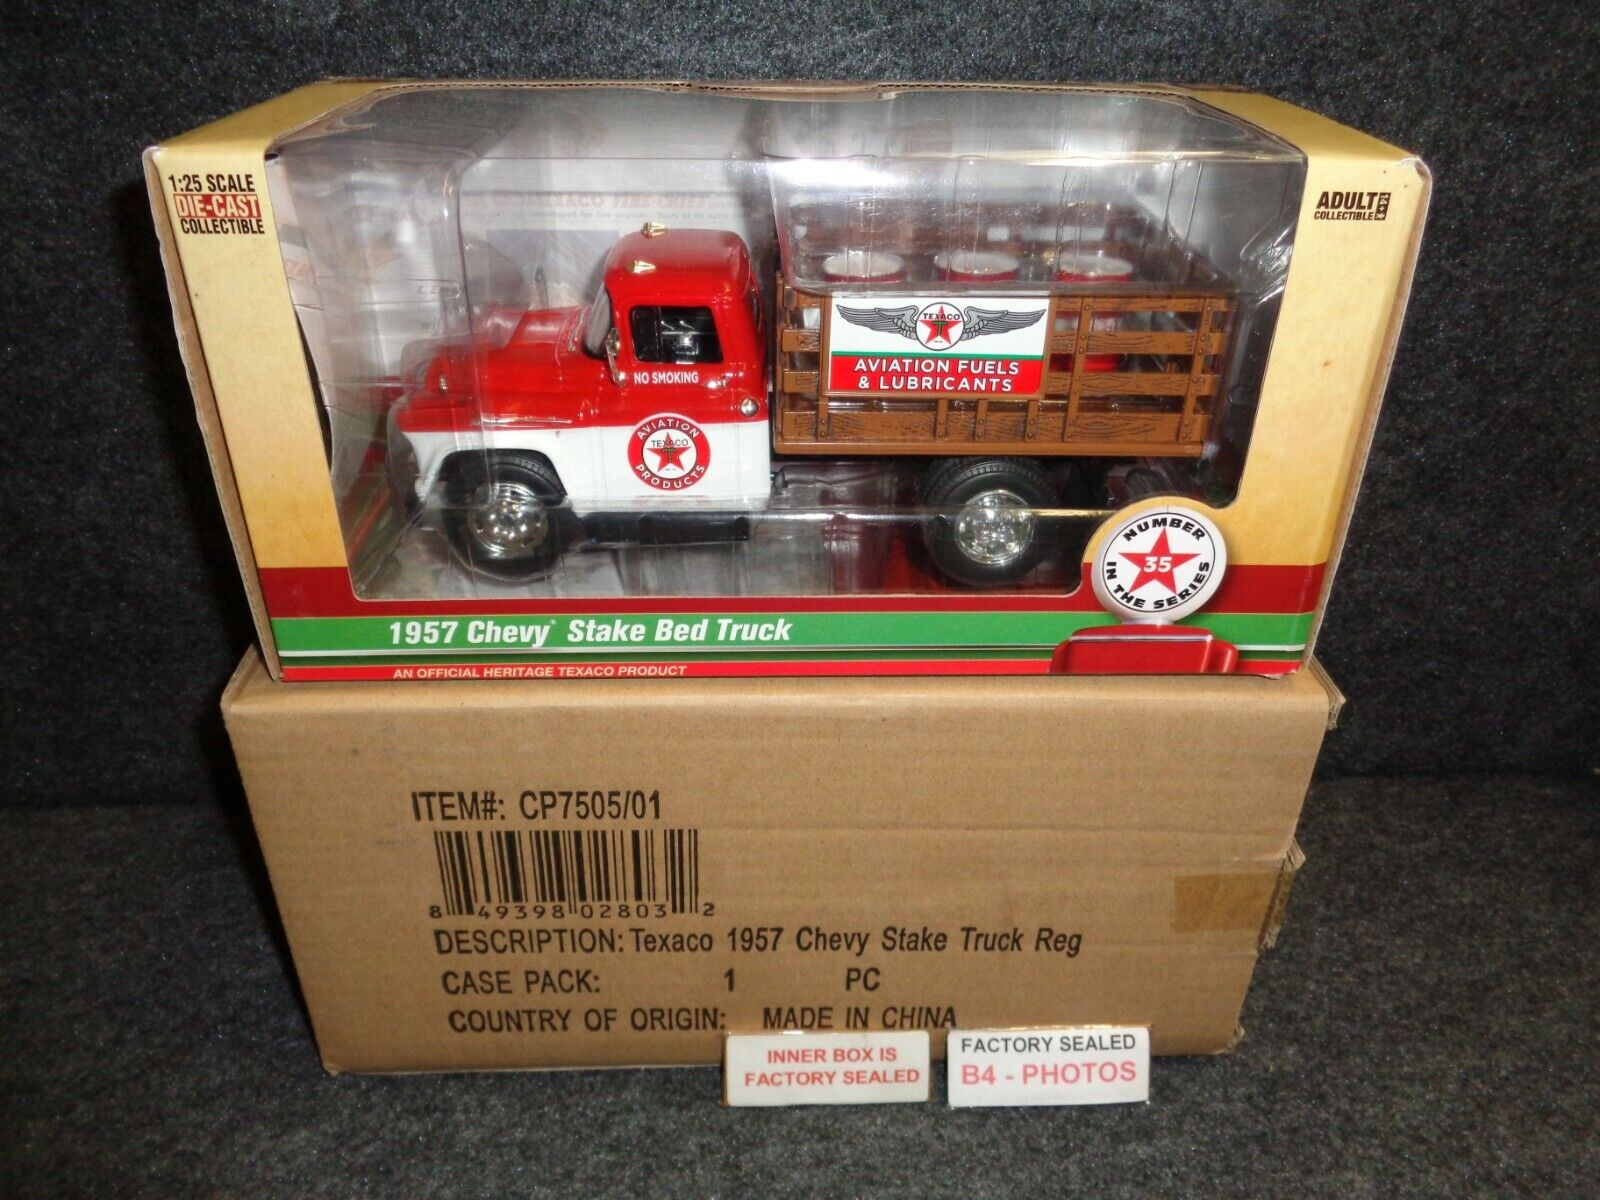 TEXACO 1957 CHEVROLET STAKE BED DIECAST TRUCK REGULAR EDITION 2018 #35 IN SERIES